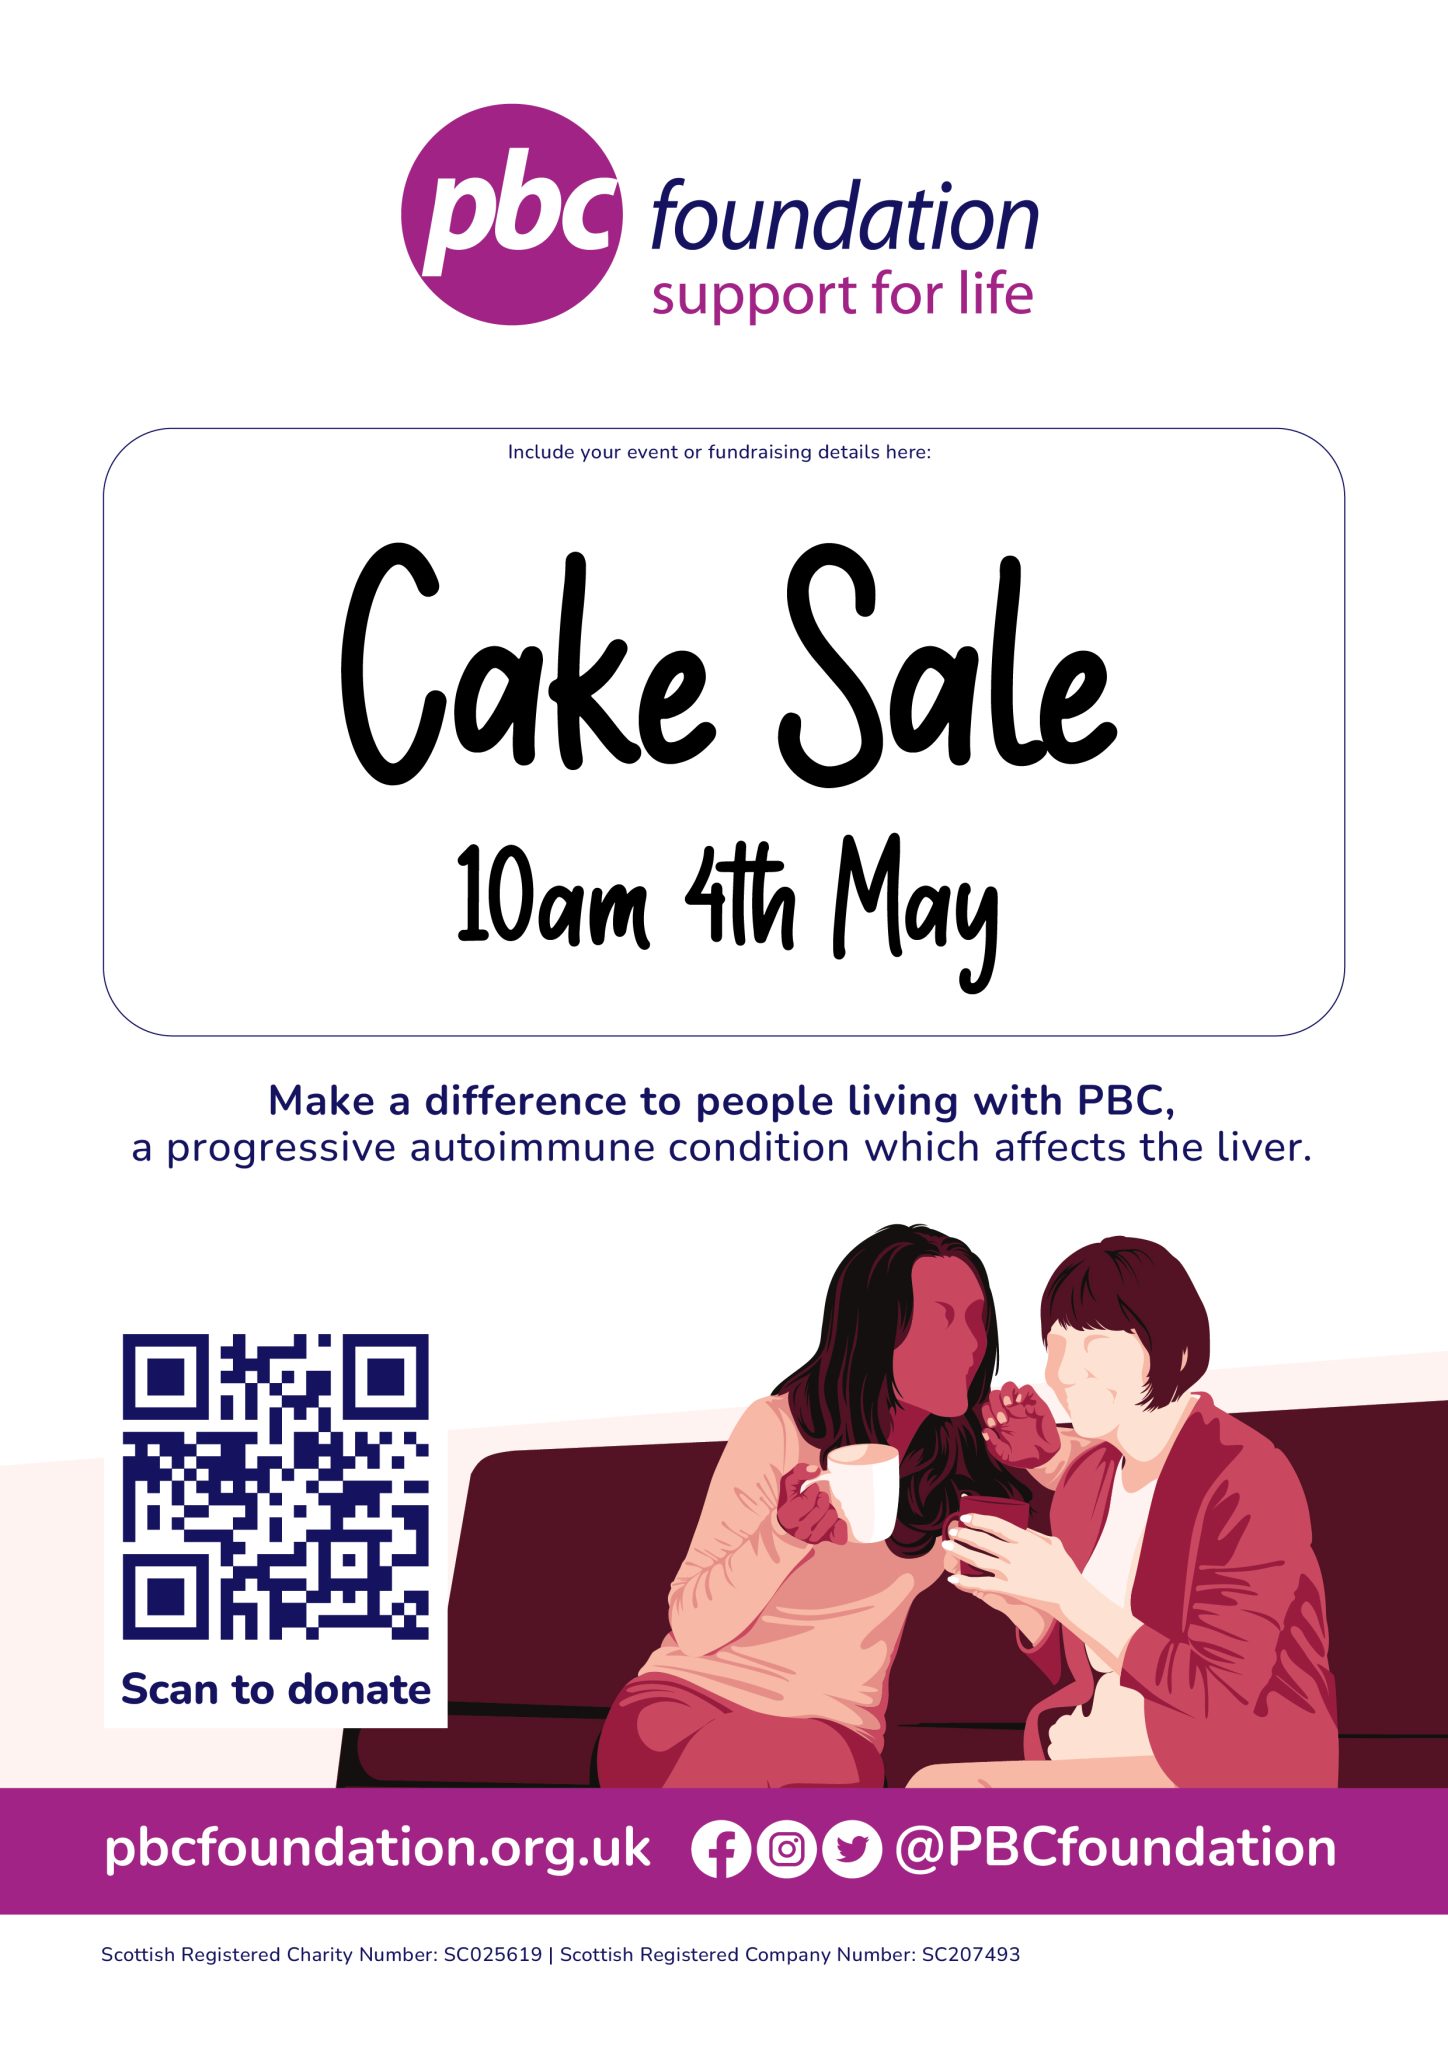 A poster that can be personalised to promote an event. It includes an image of two women chatting over a coffee. The example text says Cake Sale, 10am 4th May.